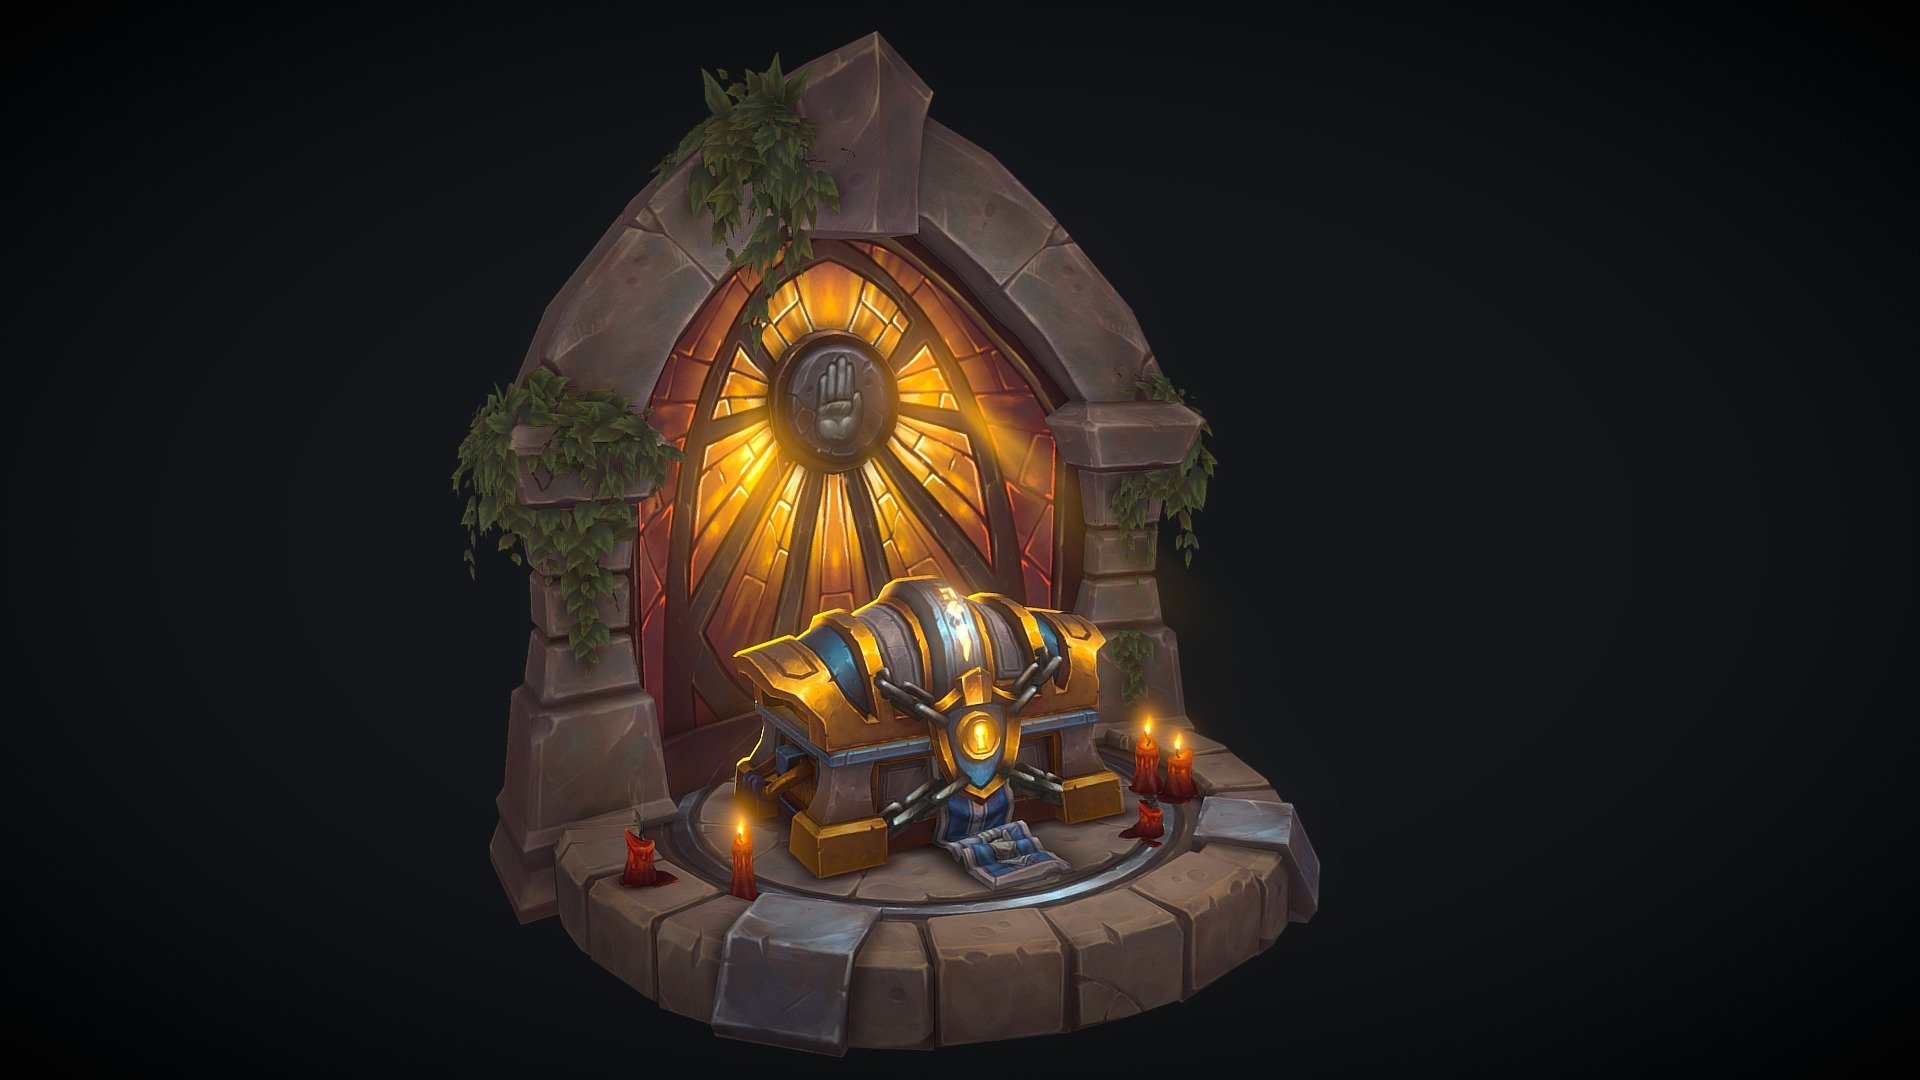 Super excited to share this Silver hand themed chest I've been working on over the past 8 weeks in Jordan Powers' Aeon Core - Brushforge class!

Many thanks to Jordan for his awesome and thorough feedback during the whole class and all of my classmates who've all done a stellar job on their projects!

My main goal for this was to capure the World of Warcraft classic paladin aesthetic but base it mostly on the Knights of the Silver Hand themes and emblems. I also wanted to push my rendering skills with Jordan's help and chose a decent number of materials to render. Although I didn't get to do any organics (or wood) I still feel like my rendering skills have massively improved and am looking forward to future projects!

Check it out on Artstation here: https://www.artstation.com/artwork/B1LNlk

By Blood and Honor We Serve! - Silver Hand Paladin Chest - 3D model by Aleksandar Lepojevic (@djanki) 3d model